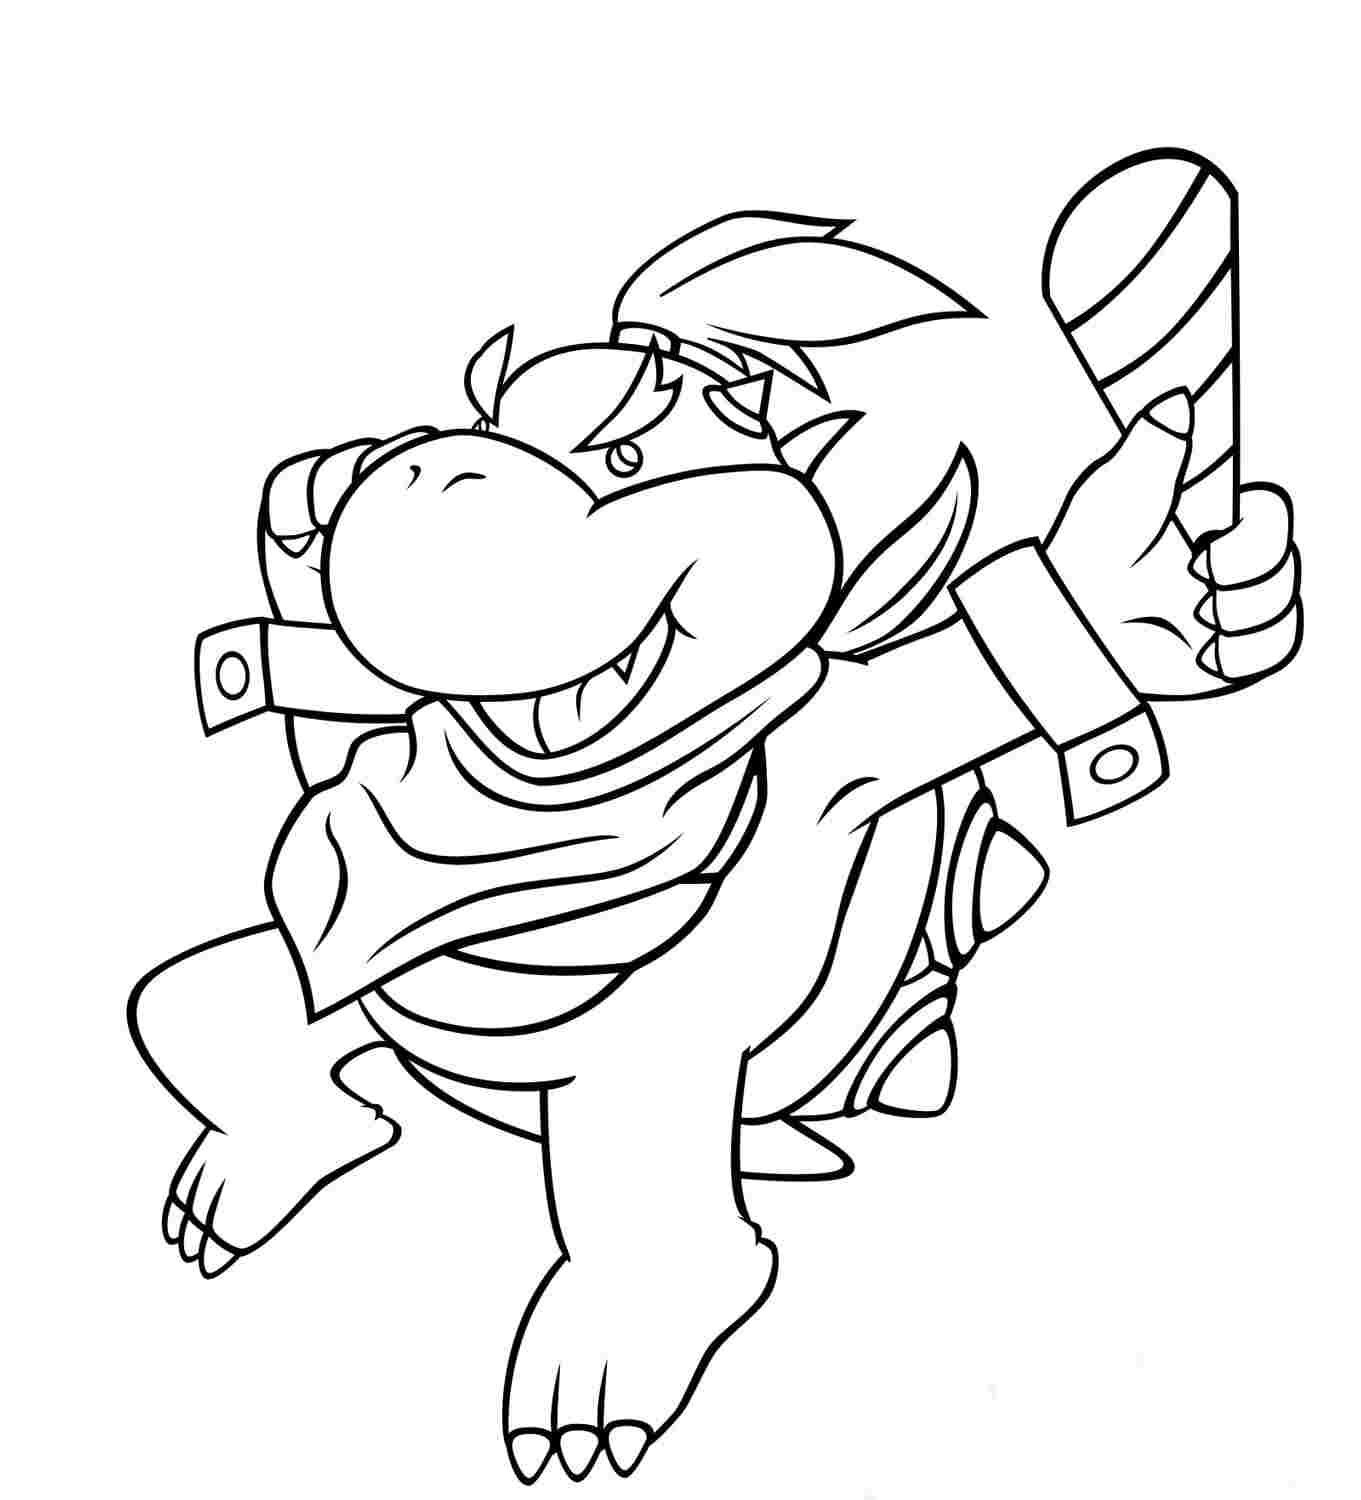 Bowser from Super Mario Bros Coloring Pages - Get Coloring Pages